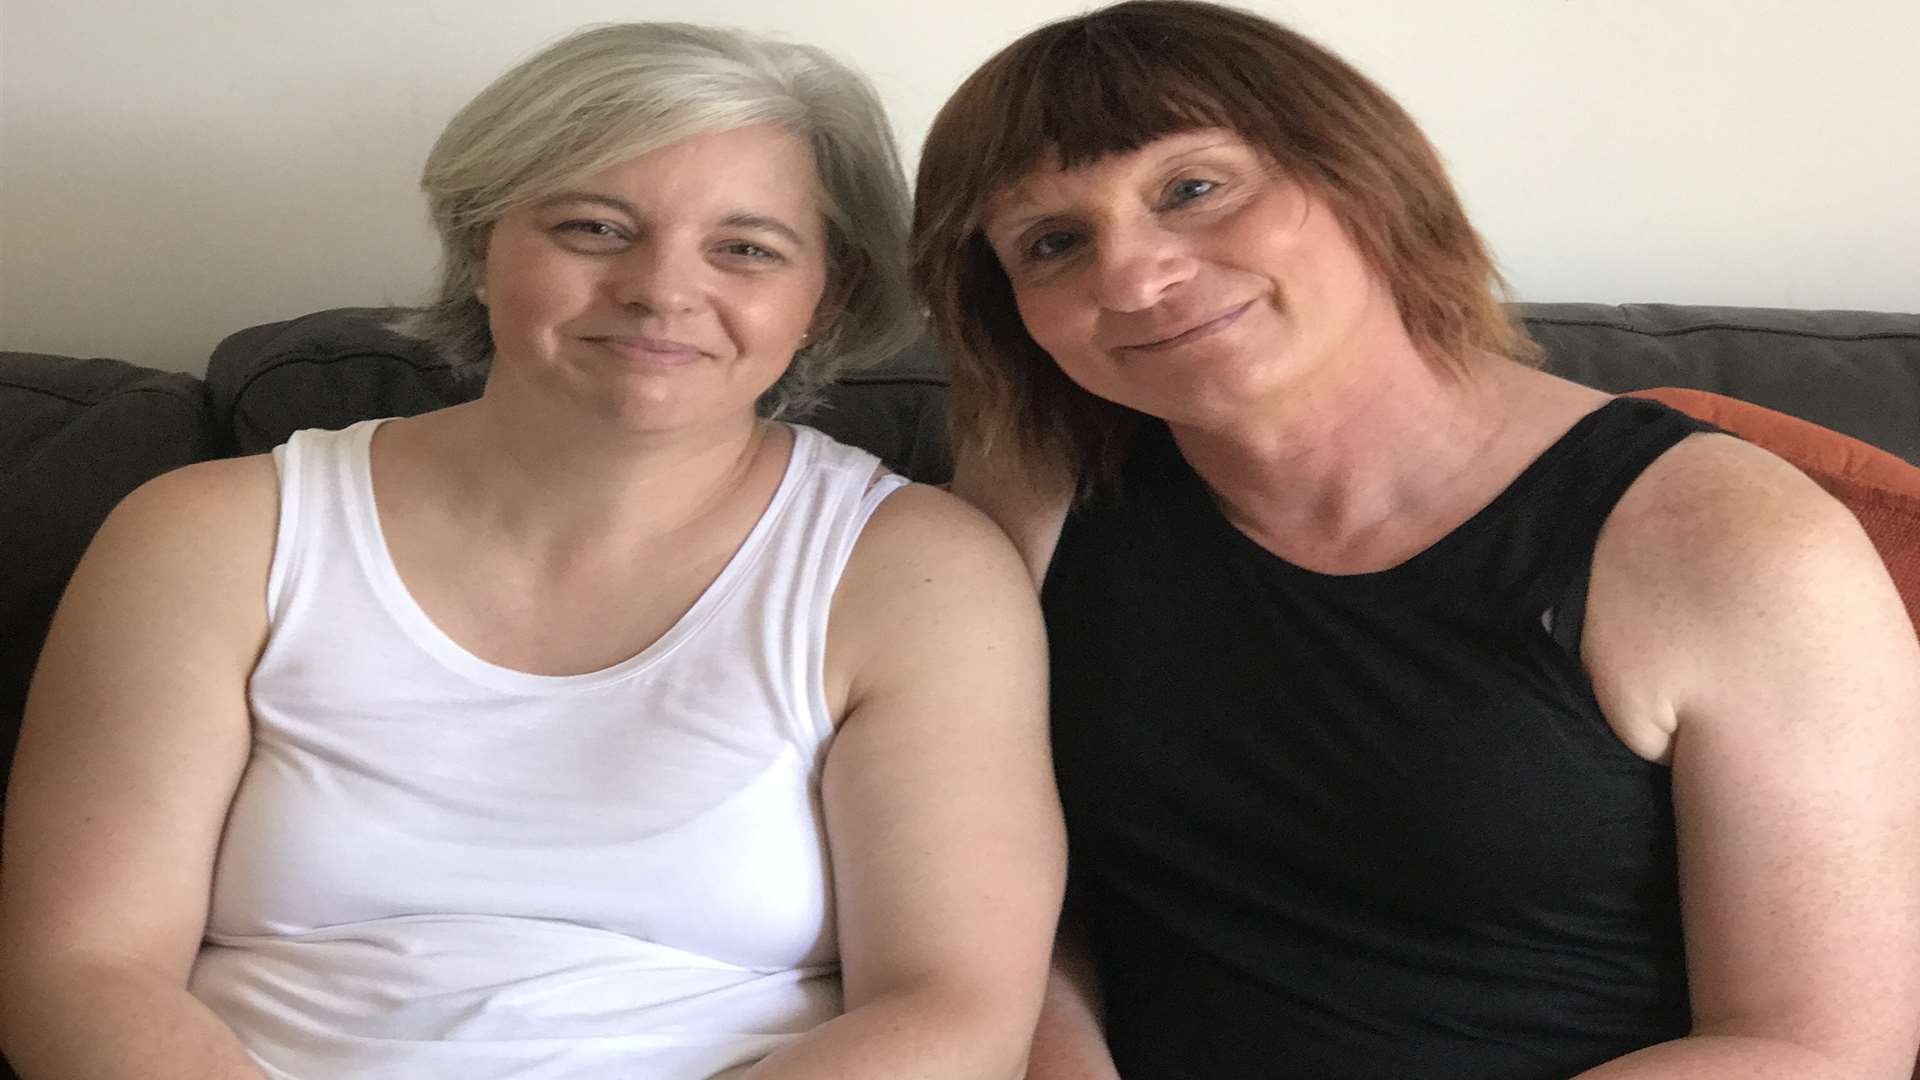 Denise and Kristiana Taylor were married in 1996